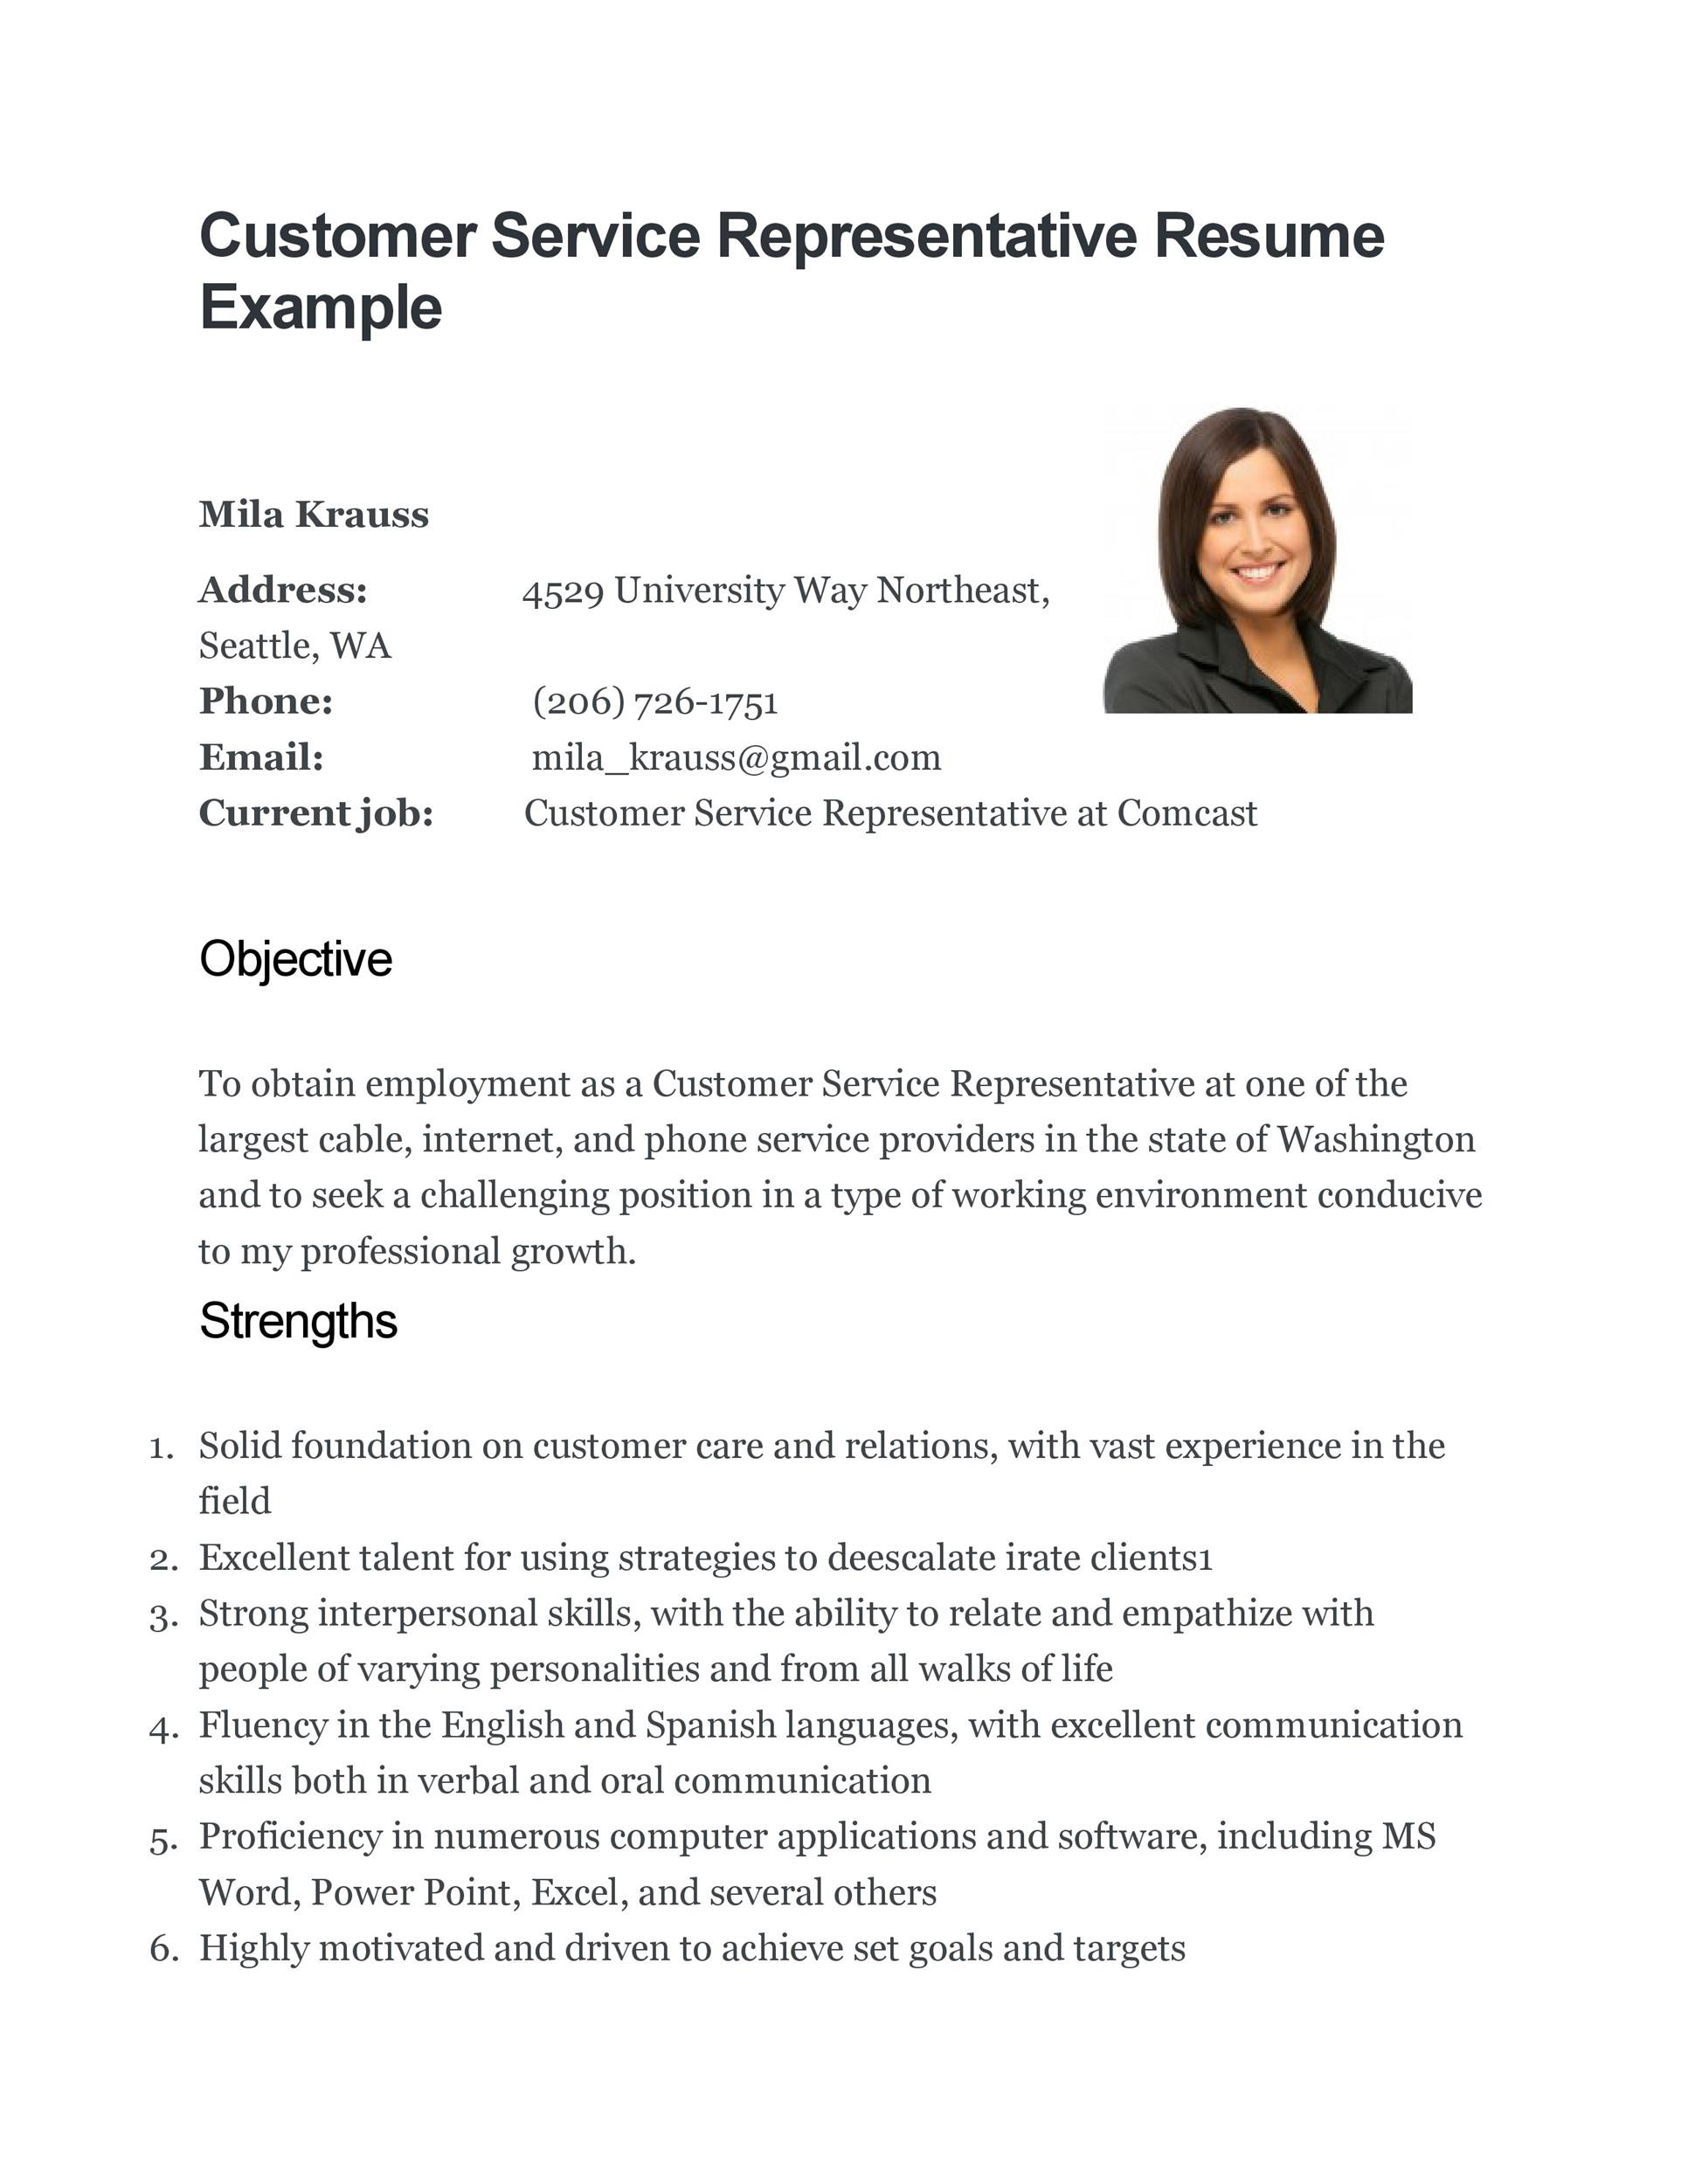 Online Suctomer Service Rep Resume Samples 30lancarrezekiq Customer Service Resume Examples á Templatelab